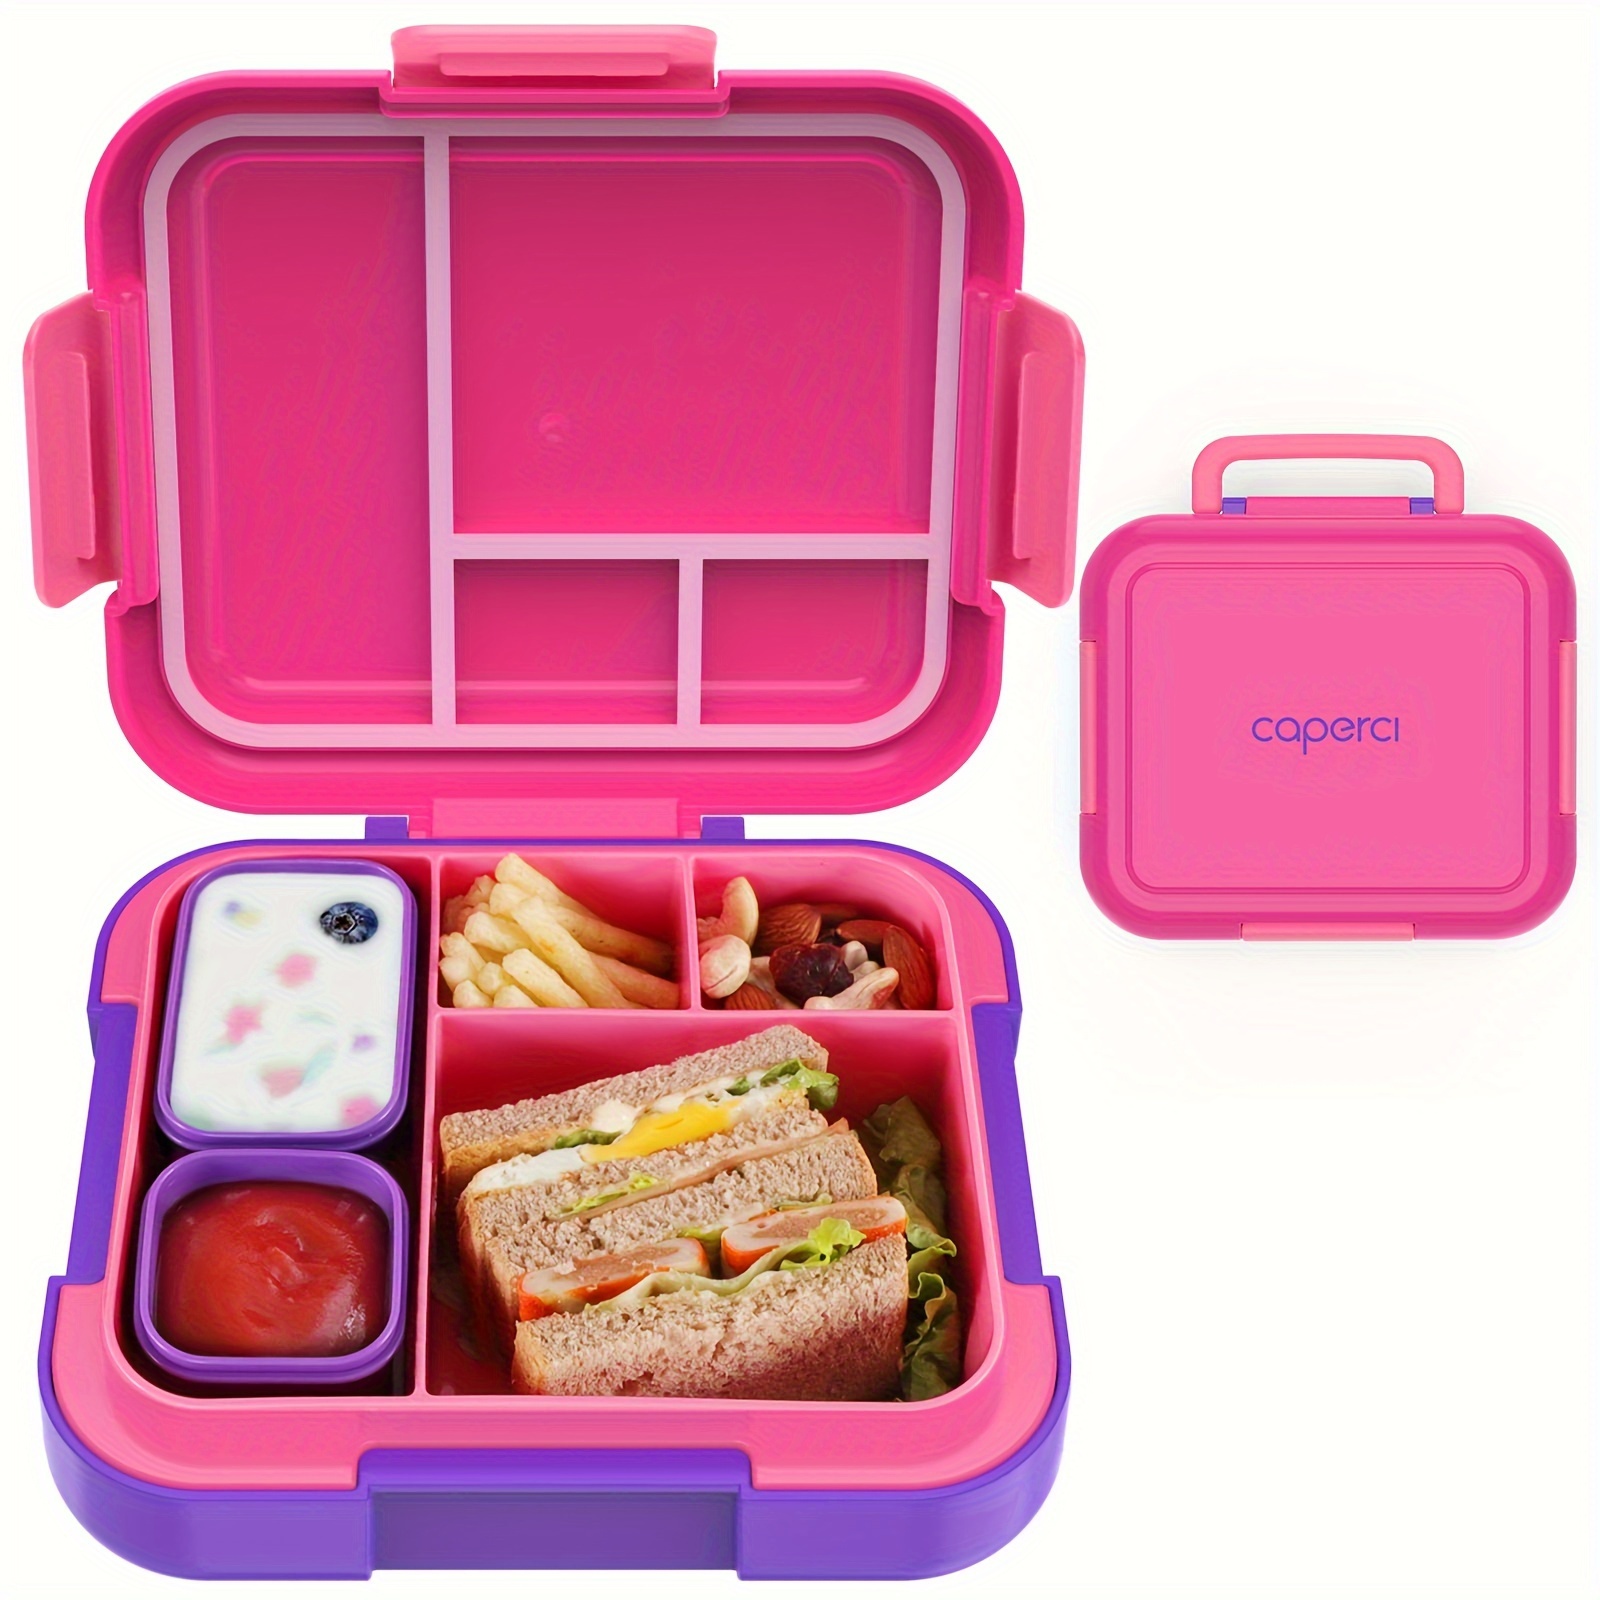 

1pc, Bento Lunch Box- Large Lunch Container With 2 Modular Containers - 4 Compartments, Leak-proof, Portable Handle, Microwave/dishwasher Safe